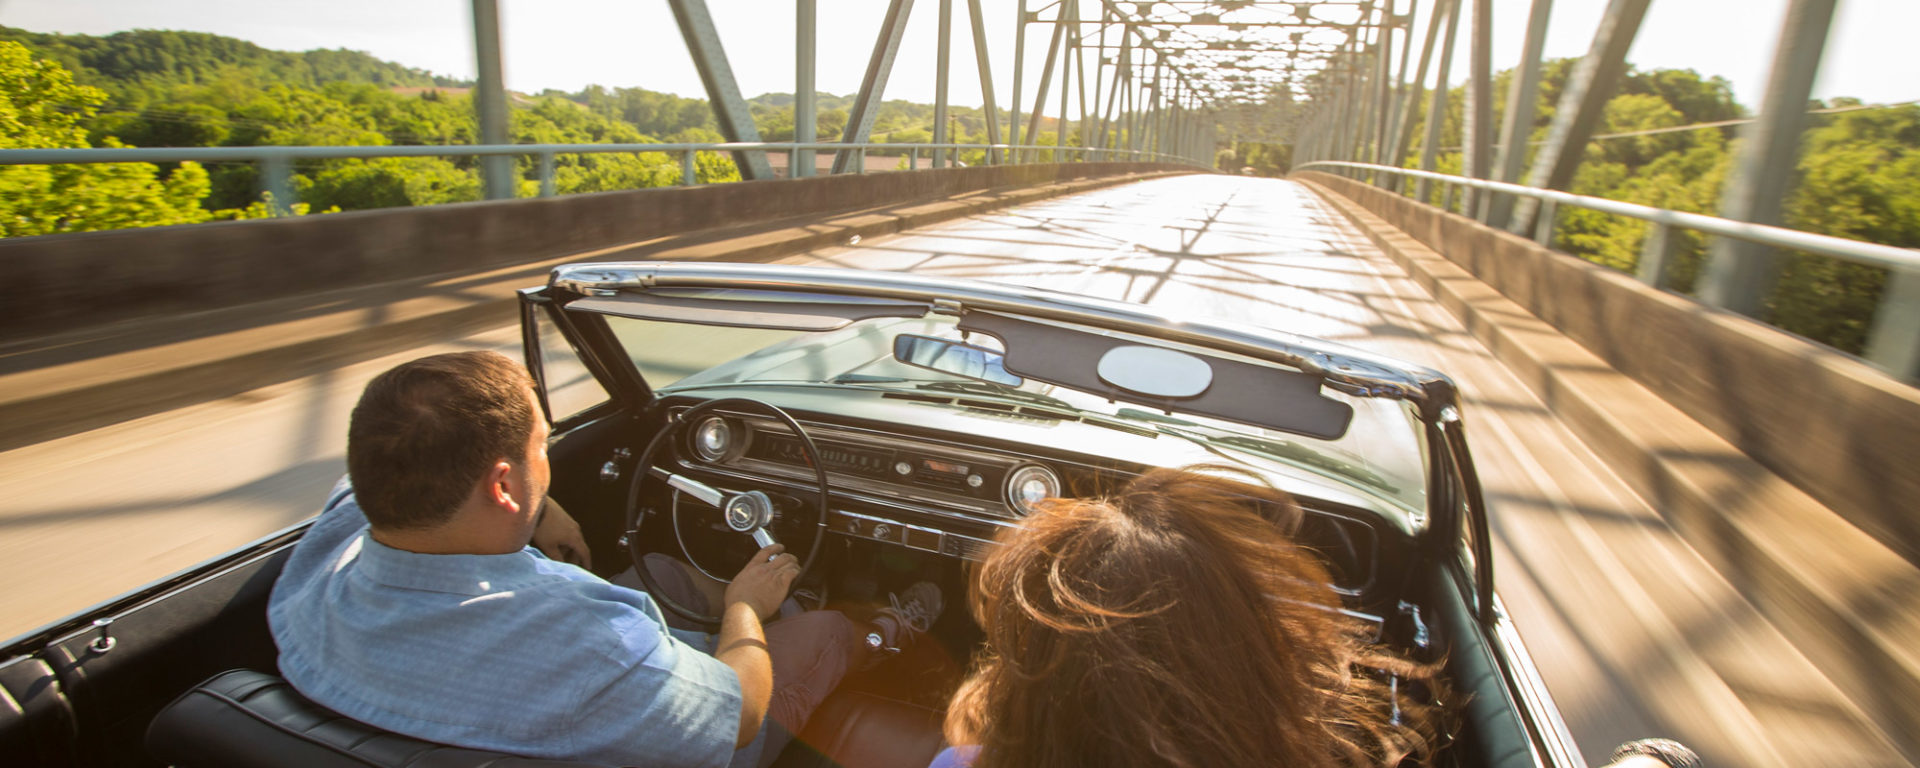 A man and woman cross a river bridge in an open-top convertible on a sunny day